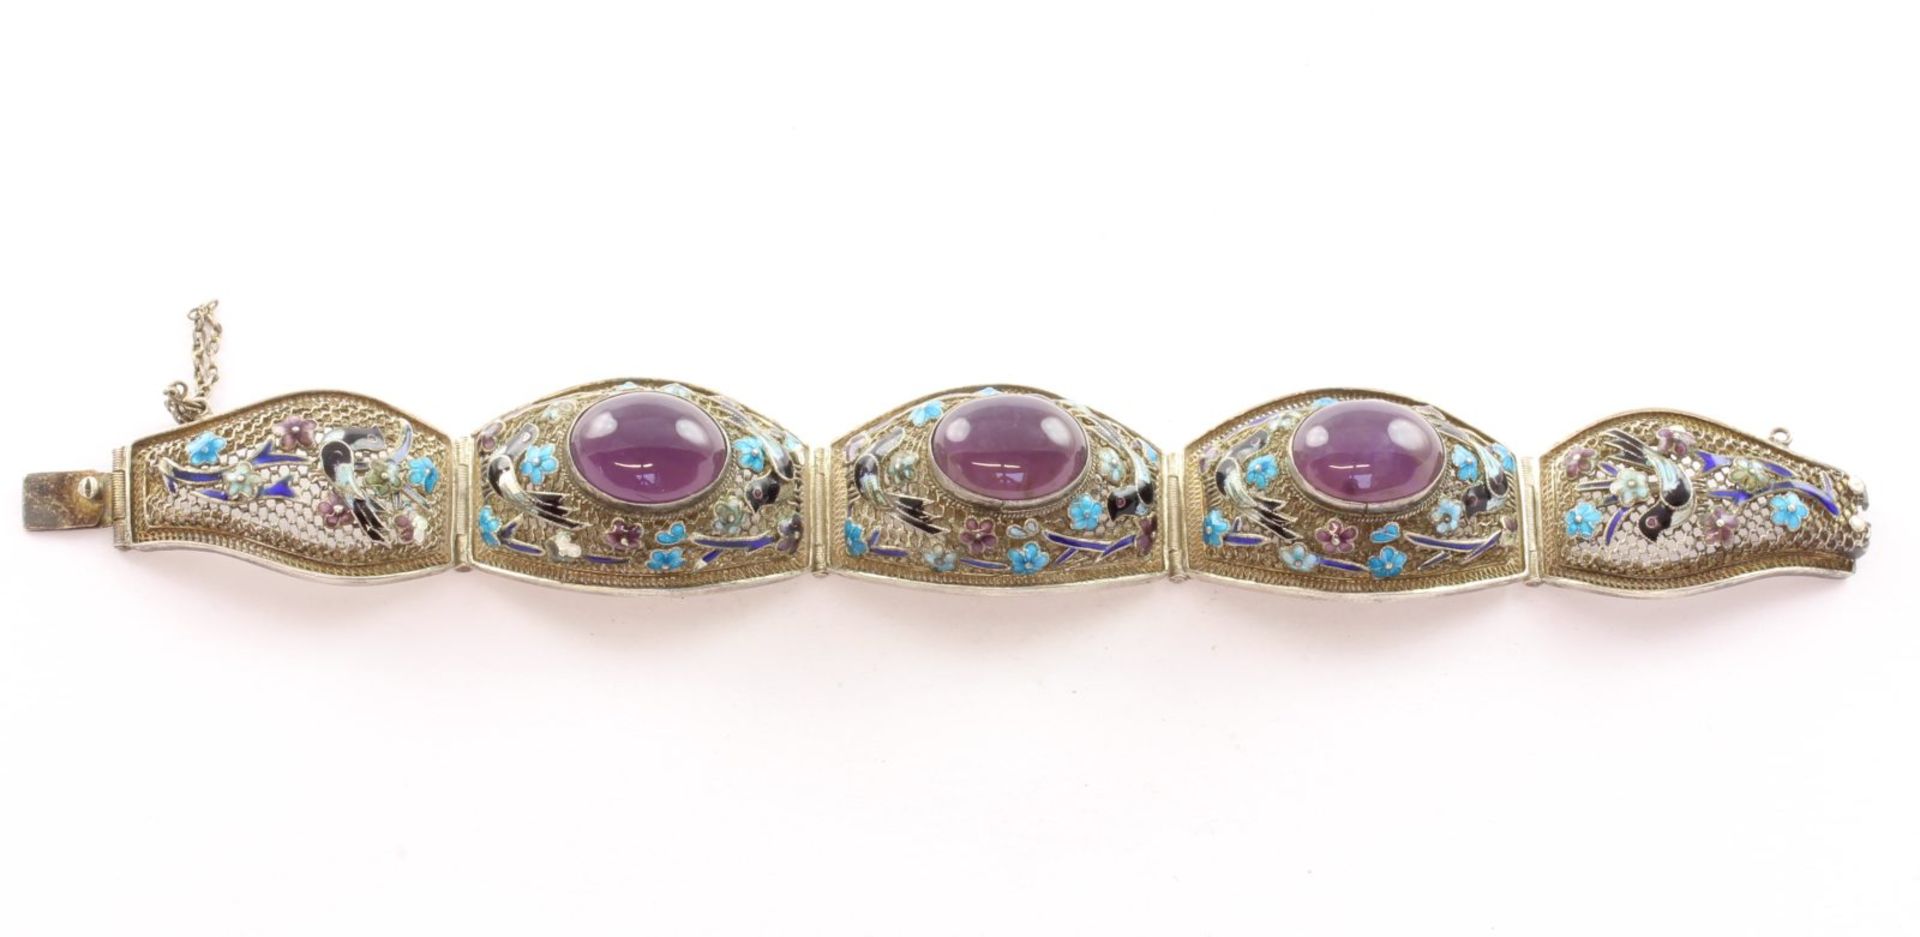 Armband, Silber, Emaille, Amethystcabochon